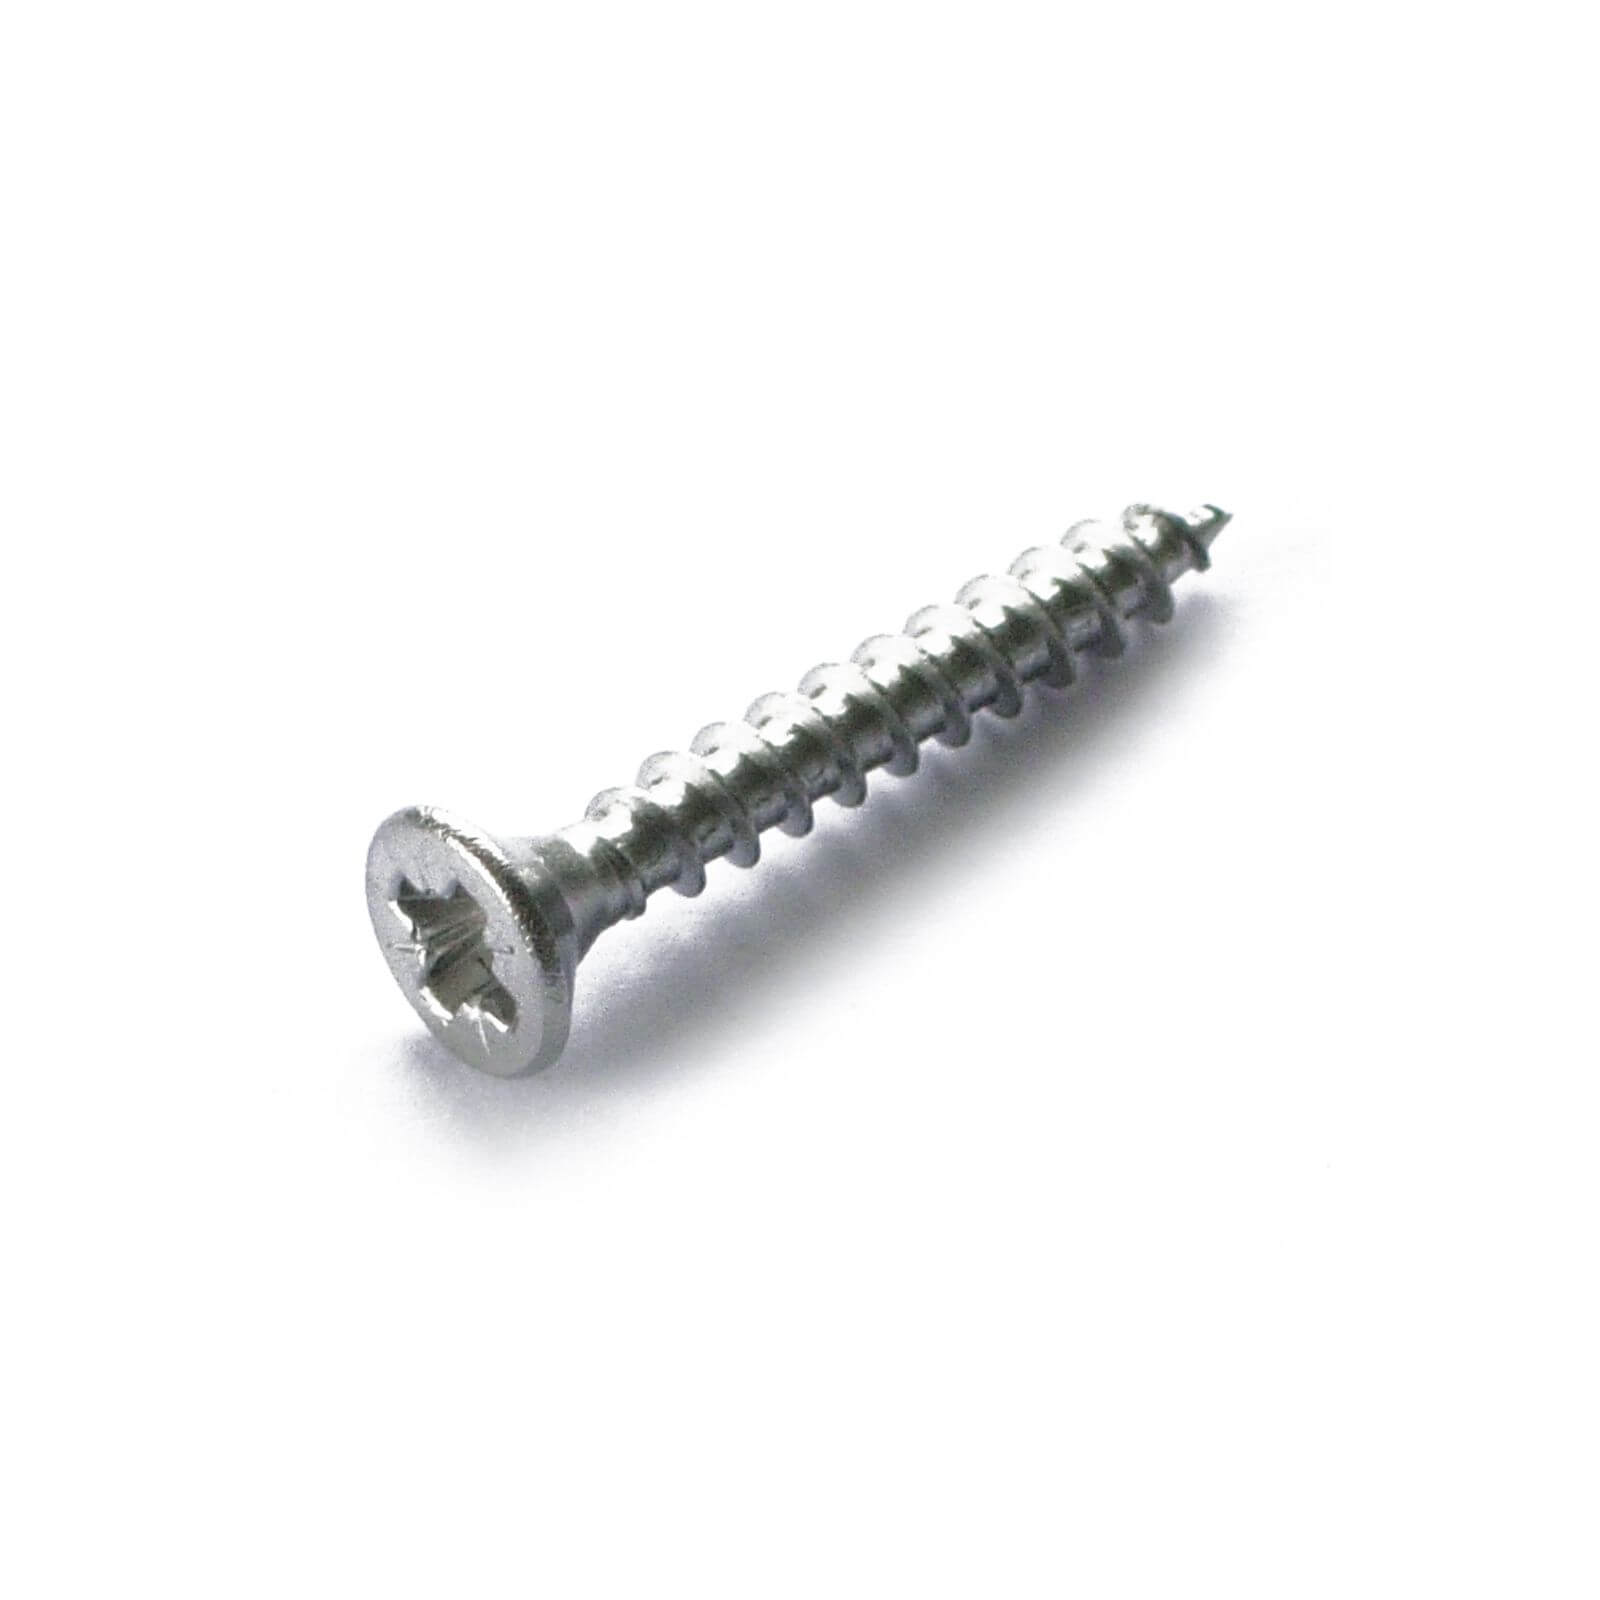 Single Thread Screw - Stainless Steel - 4 x 25mm - 25 Pack